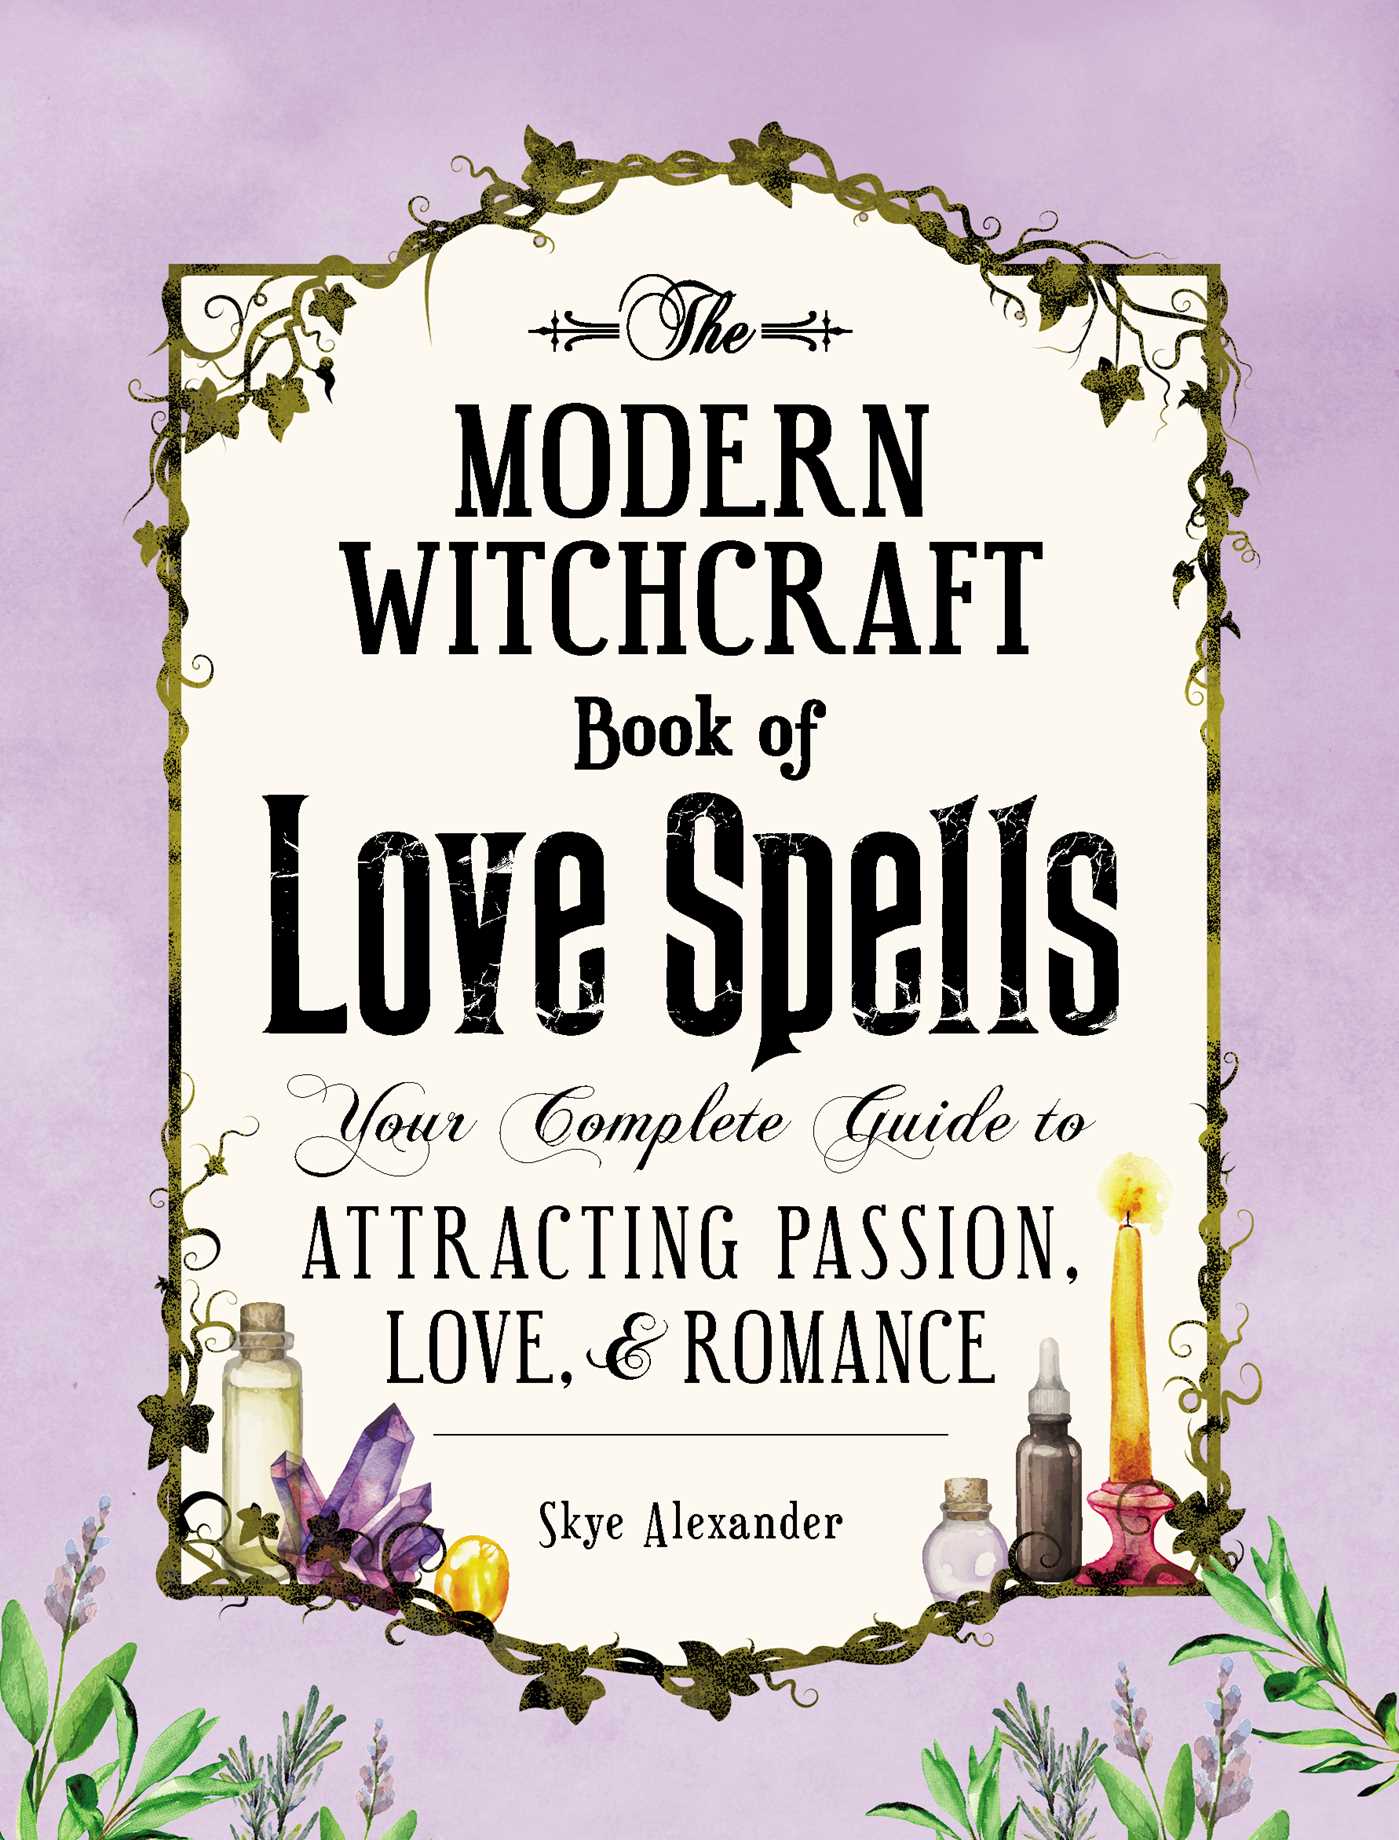 Modern Witchcraft Book of Love Spells - The Spirit of Life